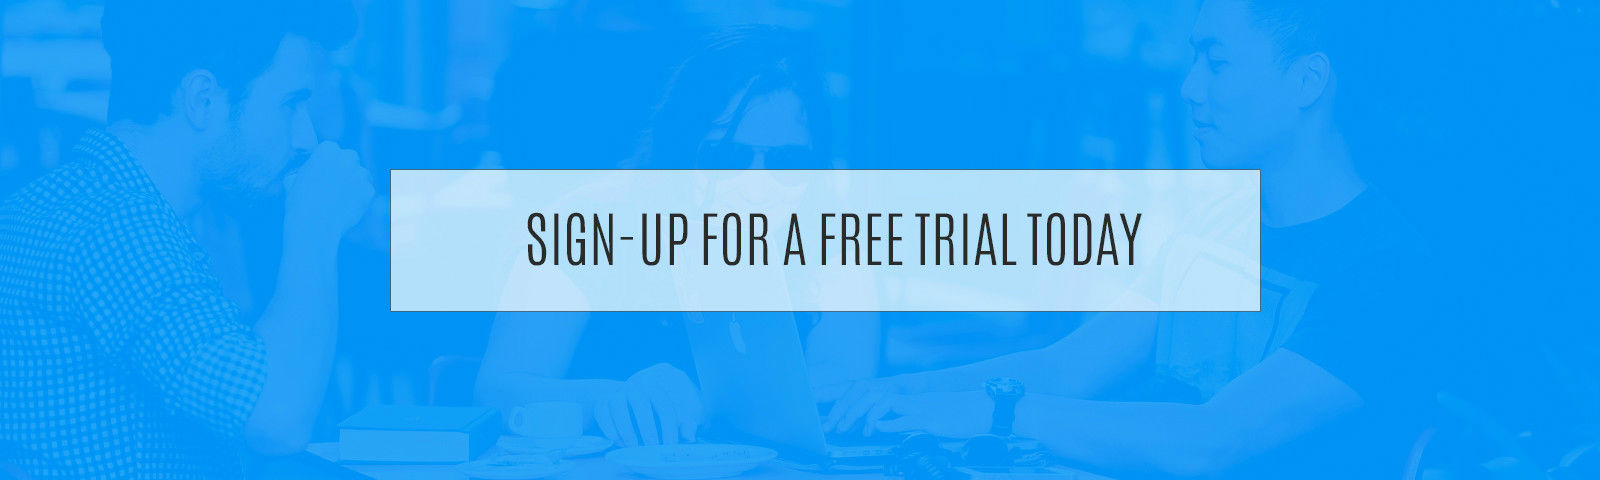 Signup for a free 30 day trial of Church Web Works.